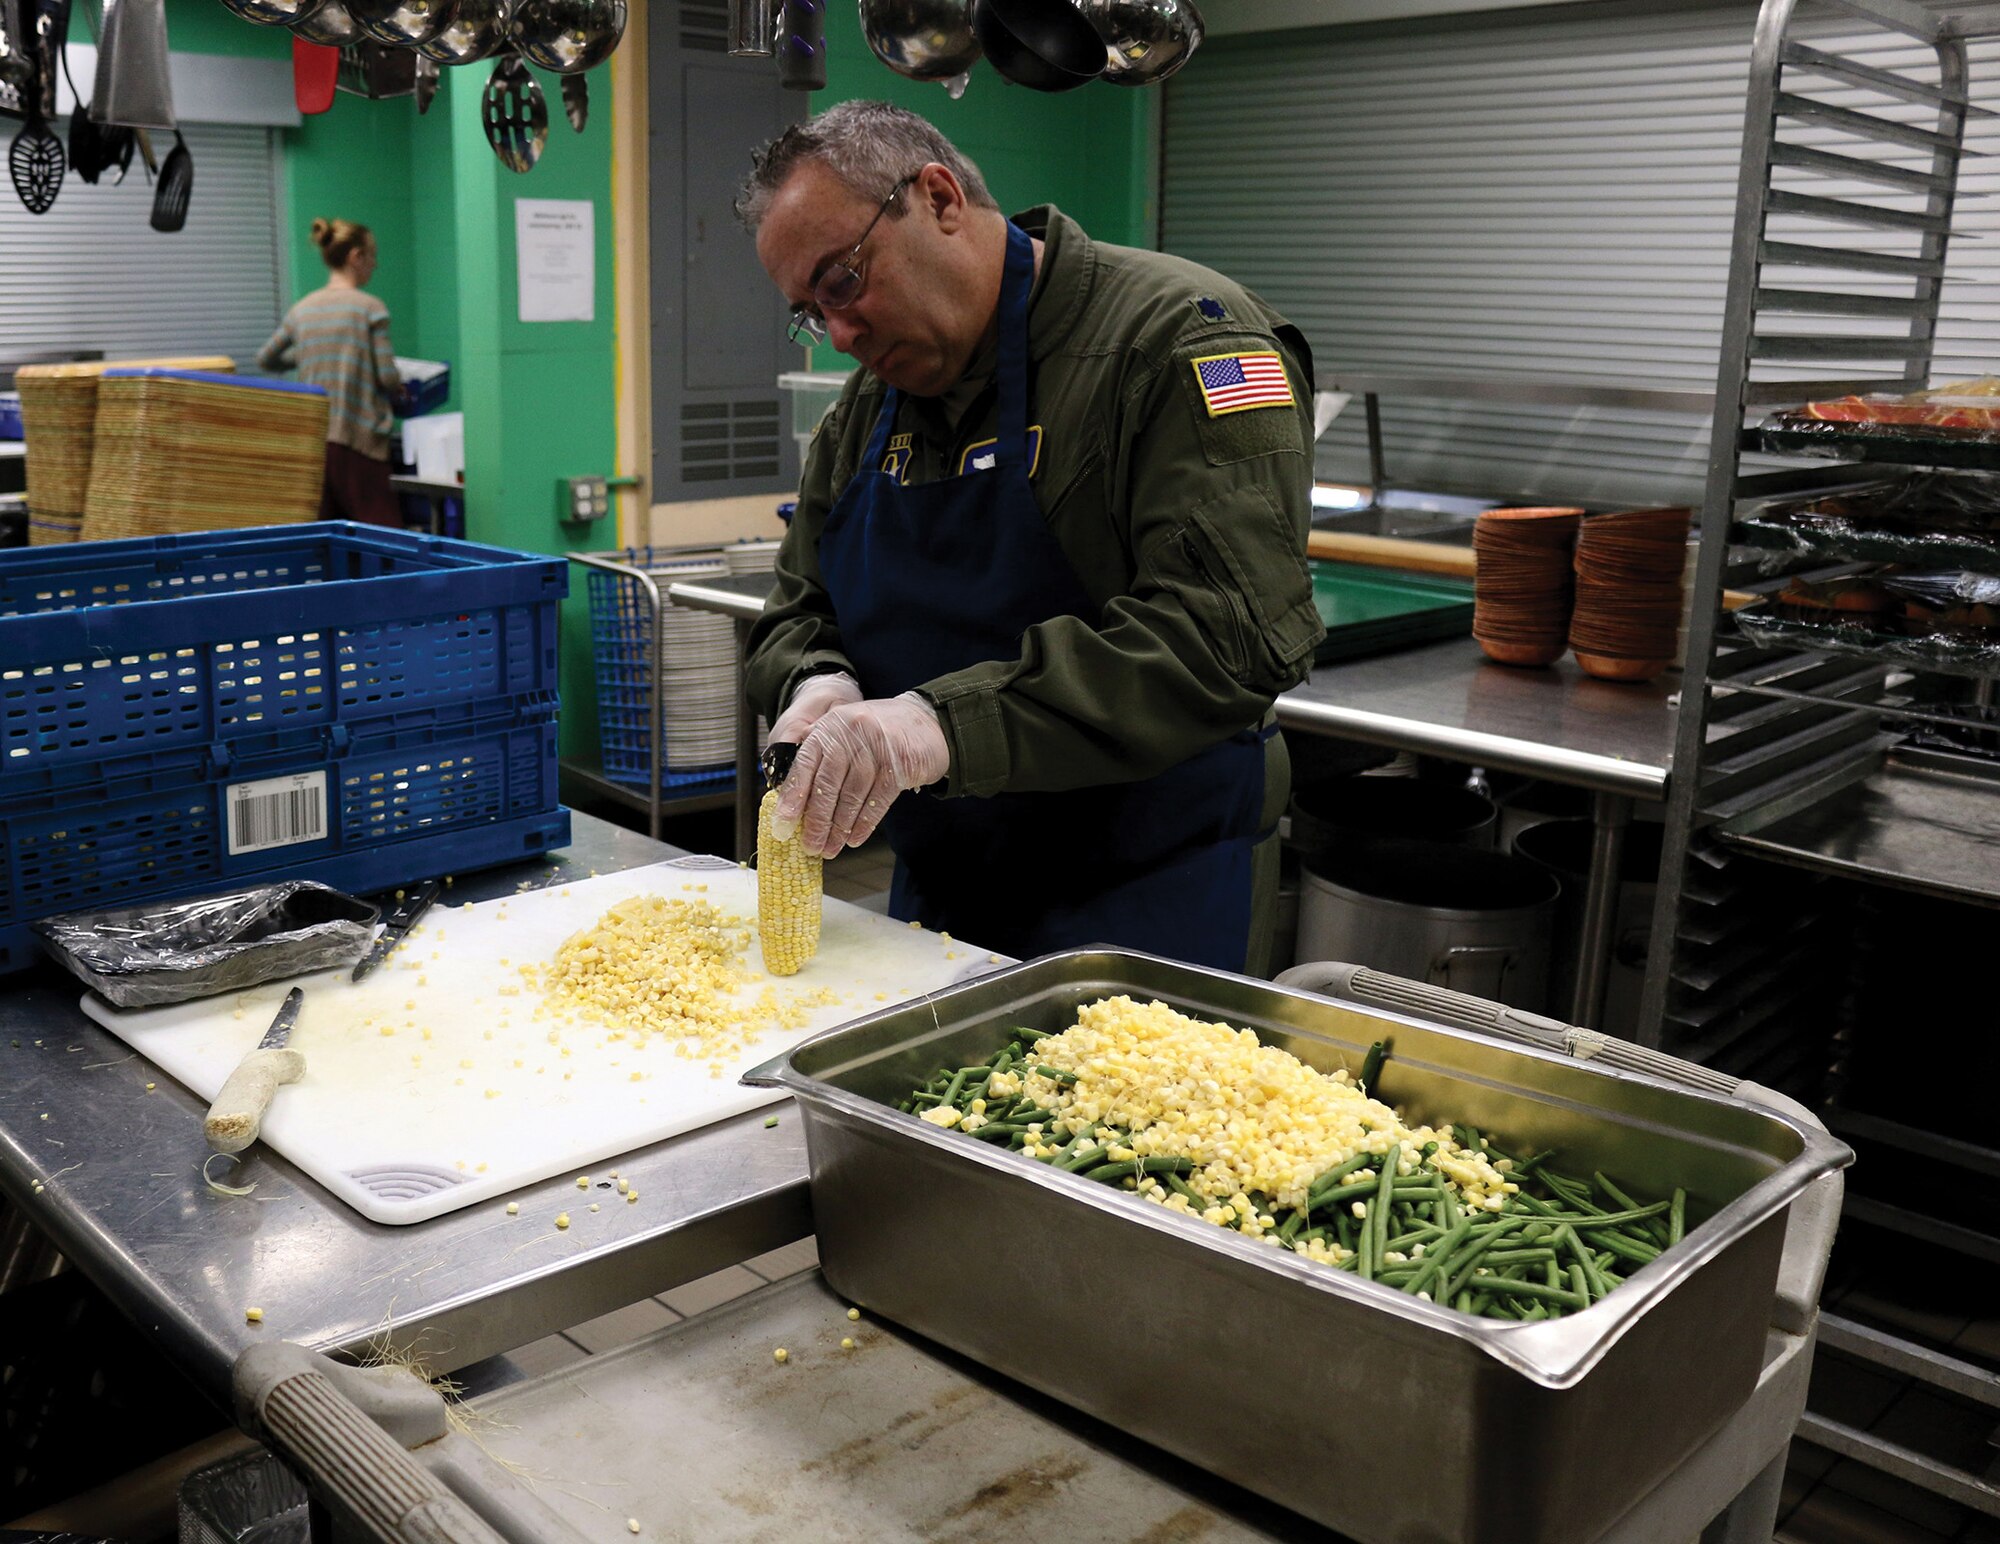 Lt. Col. Jerry Quincy, director of operations for the 89th Airlift Squadron, cuts corn off the cob while volunteering at the House of Bread in Dayton, Ohio Dec. 8, 2019. The House of Bread serves nearly 250 people a day. (U.S. Air Force photo/Staff Sgt. Joel McCullough)